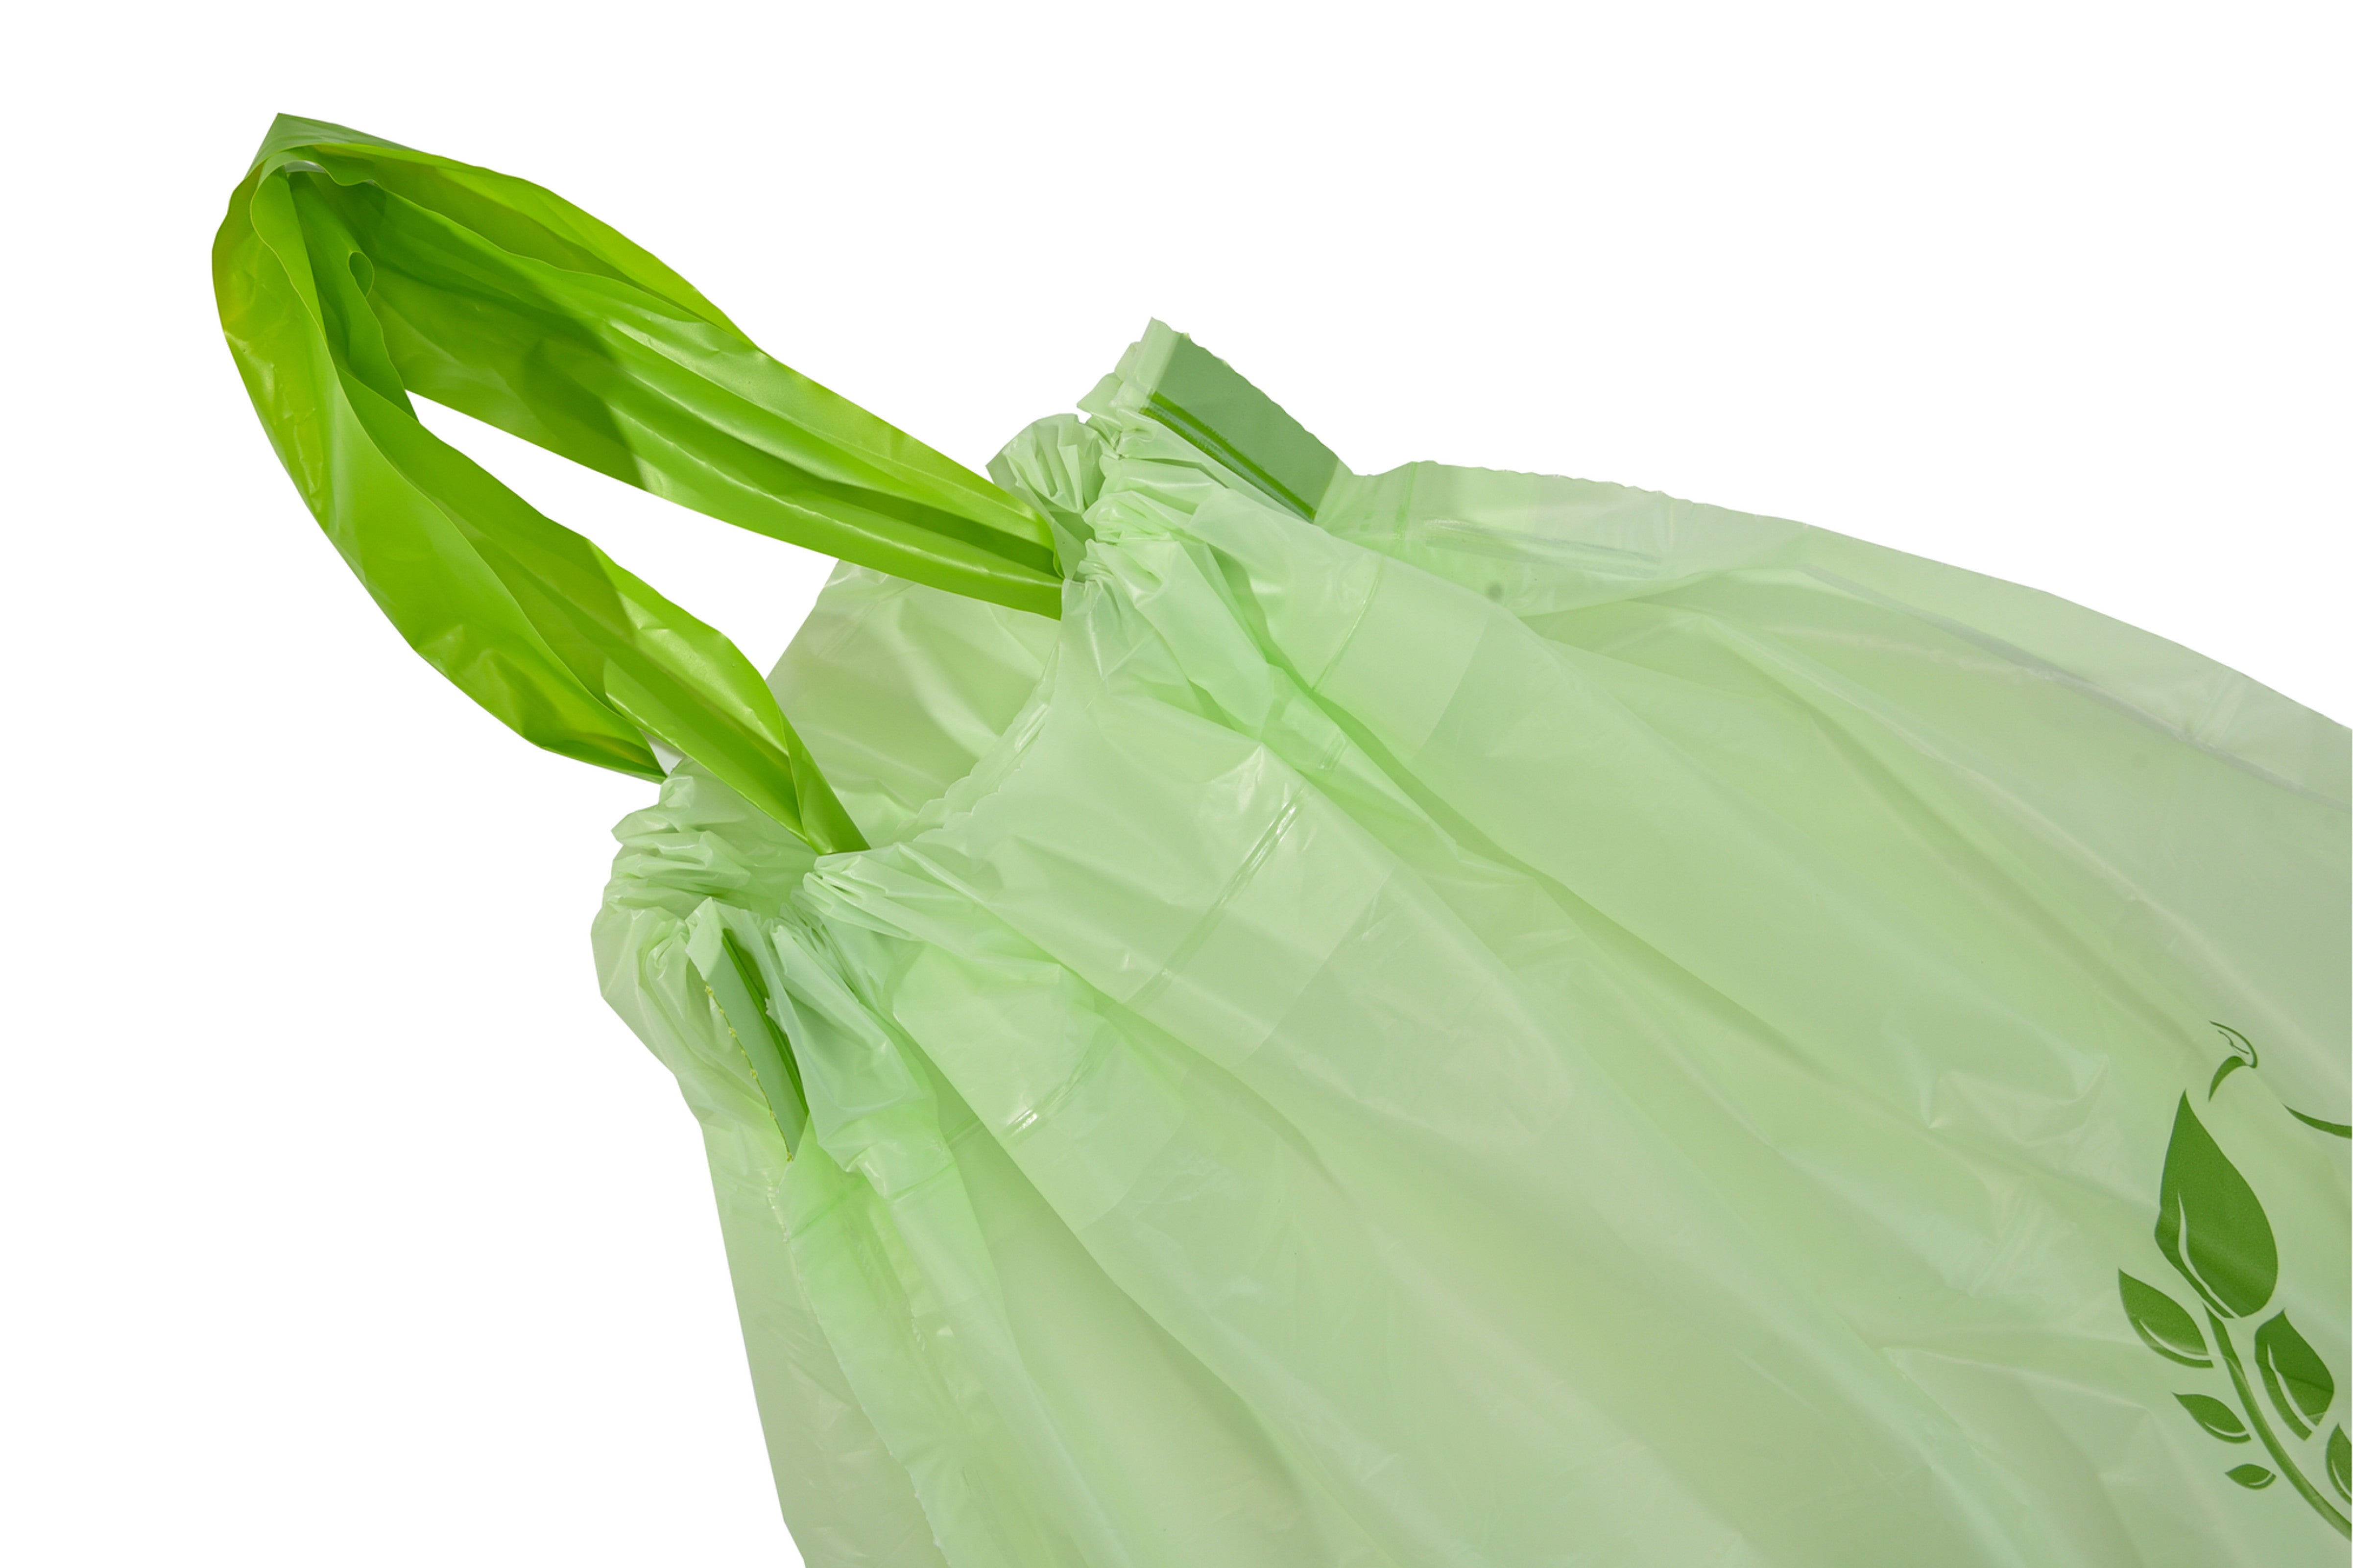 Small Garbage Bags 1.2 Gallon, 80 Counts Biodegradable Trash Bags